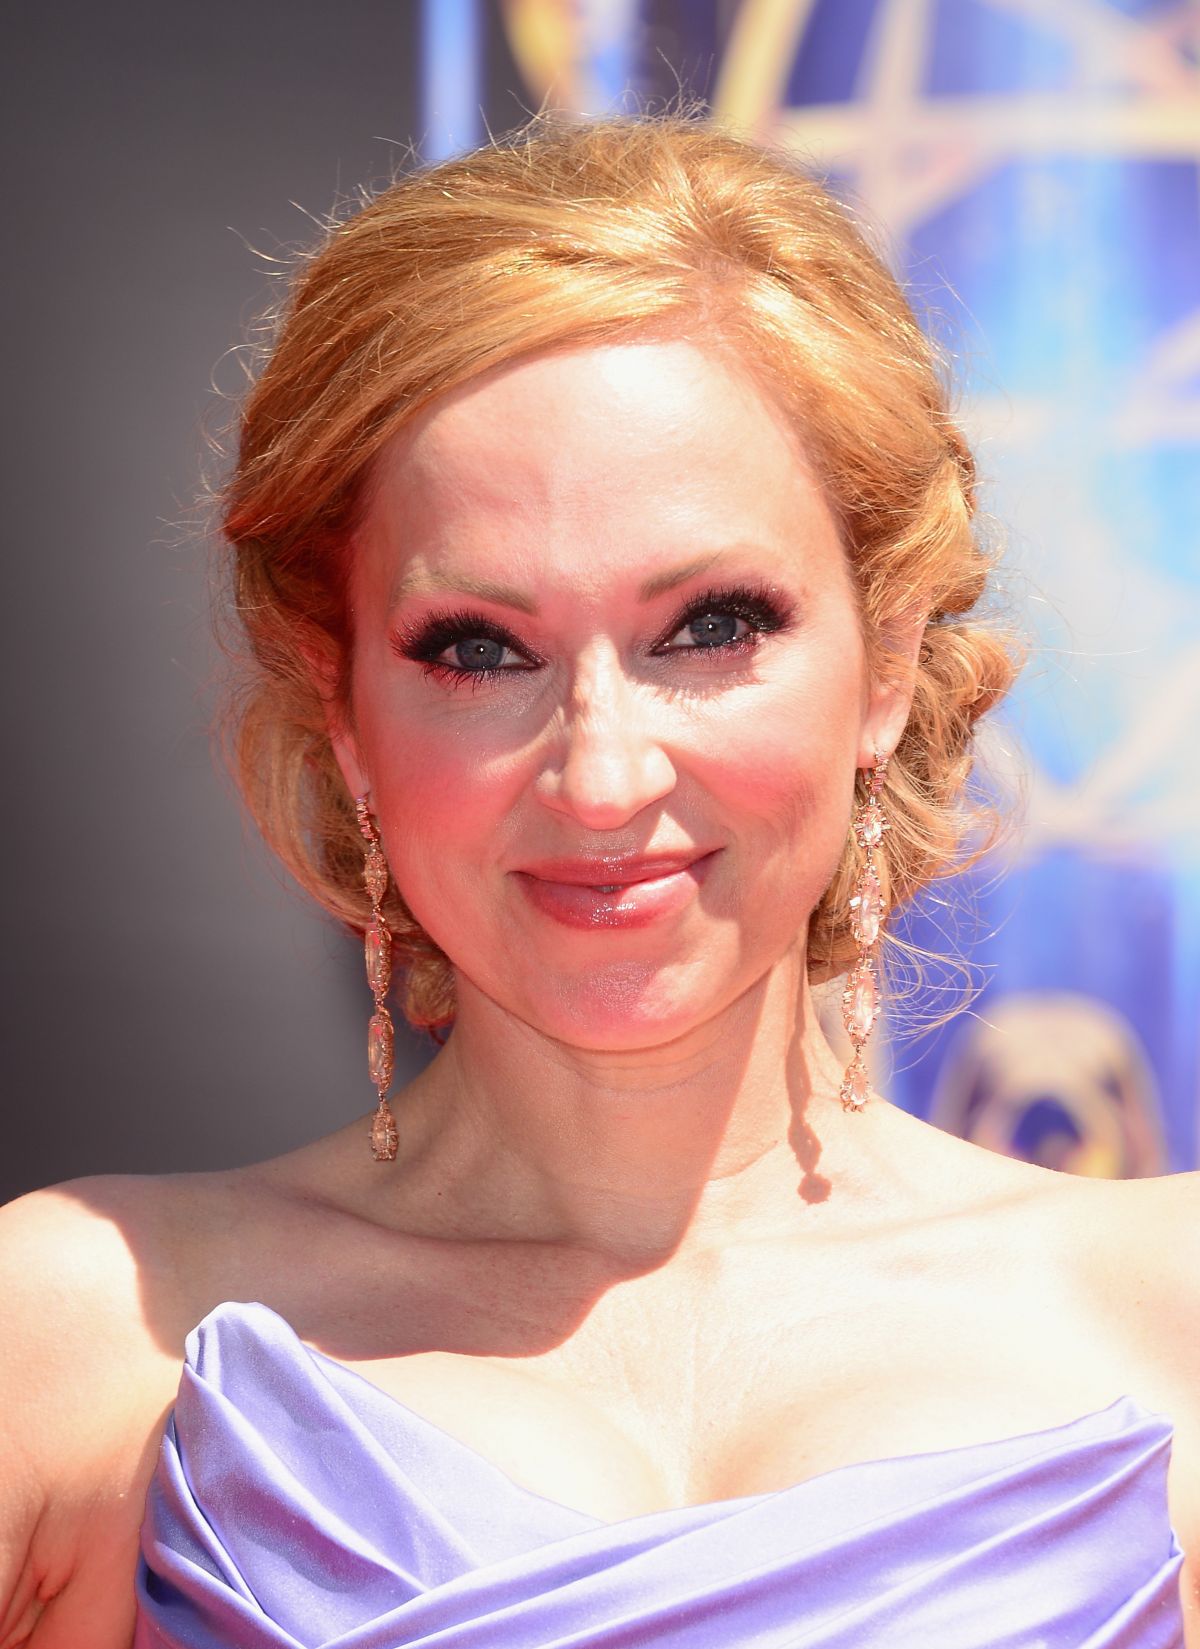 leigh-allyn-baker-at-2014-creative-arts-emmy-awards-in-los-angeles_4.